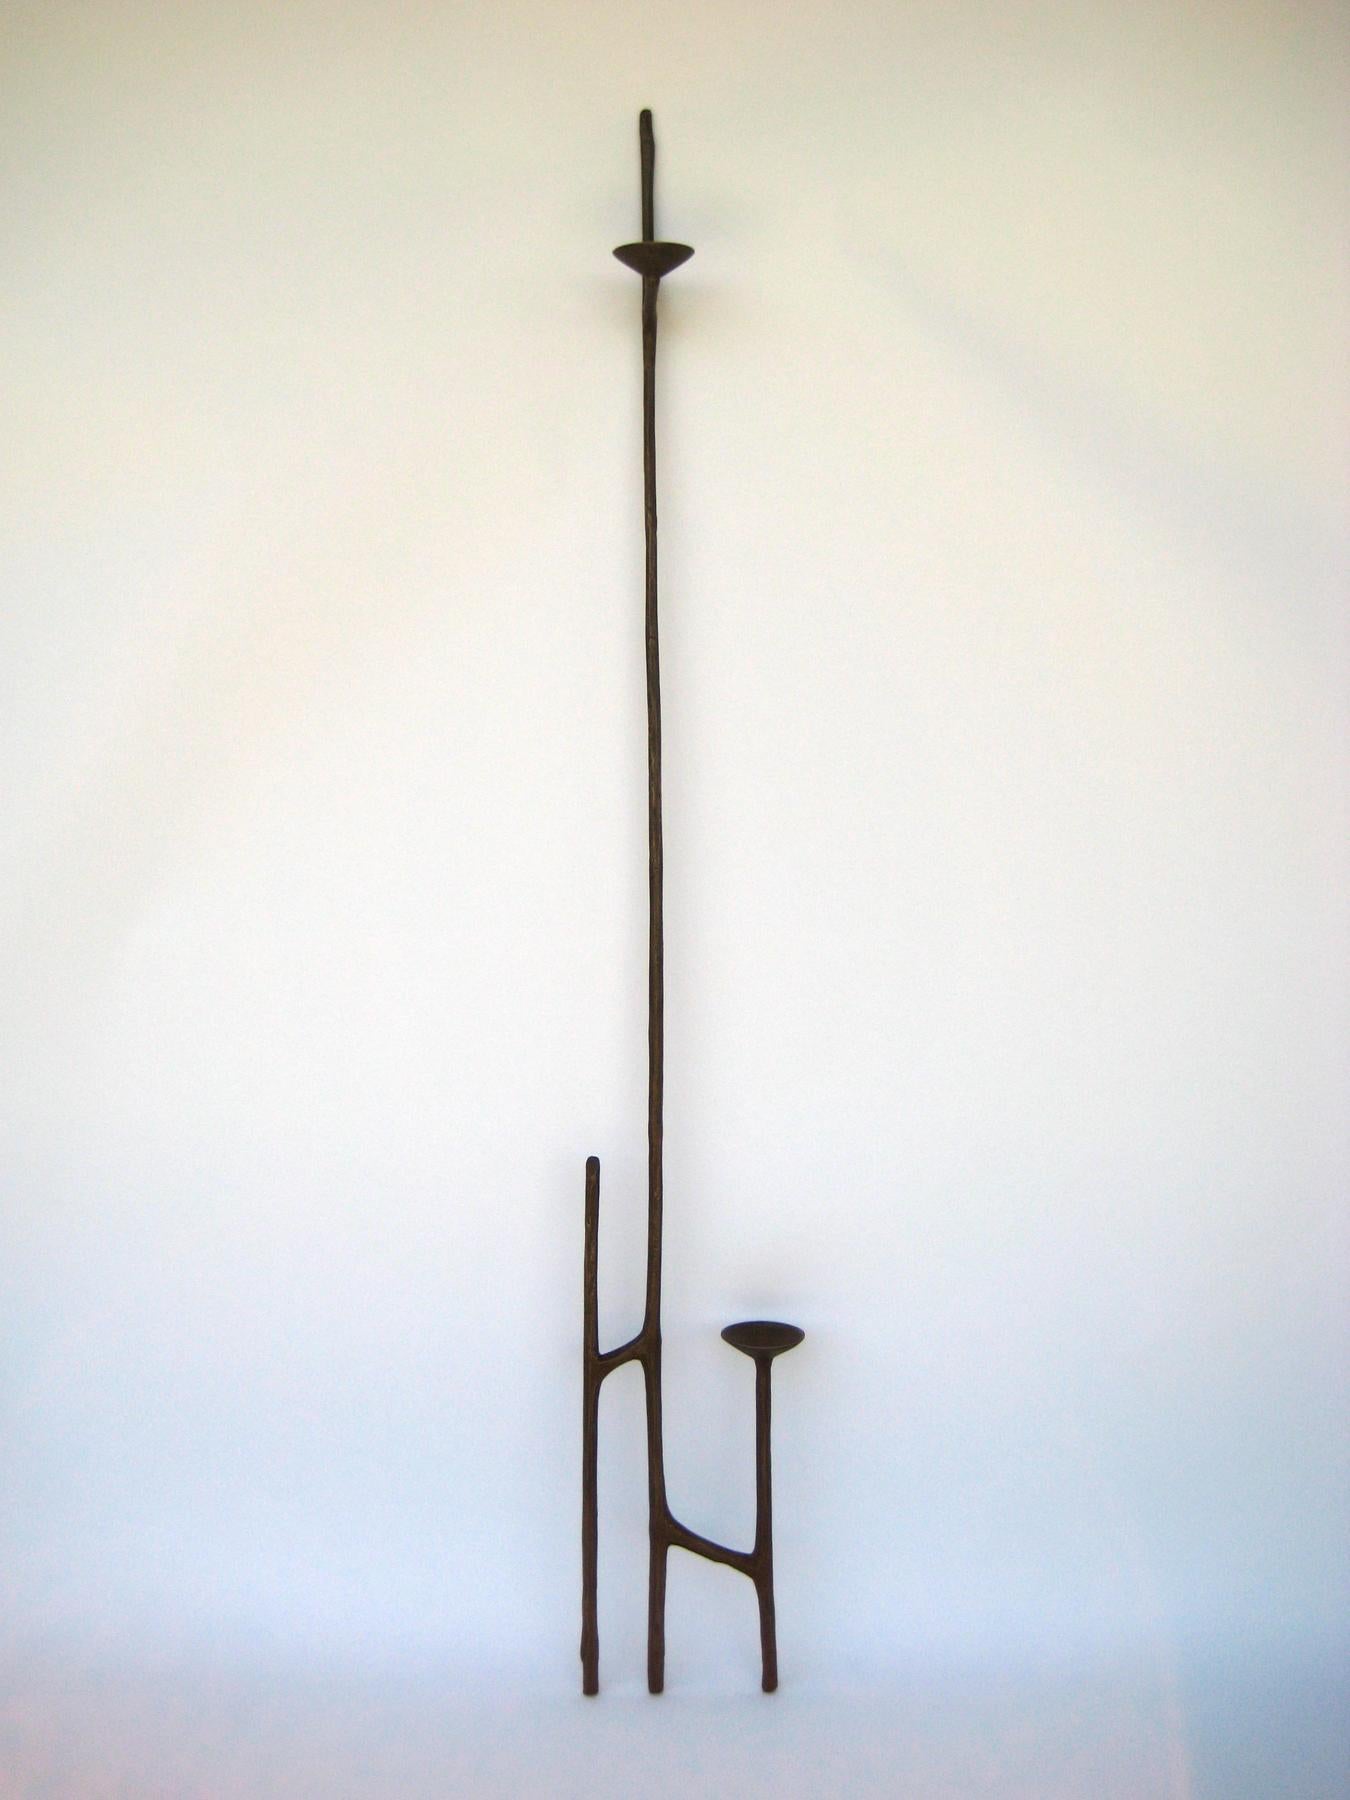 Classic brown patina bronze leaning candlestick by Mary Brogger
Dimensions: W 33 cm x D 5 cm x H 196 cm.
Materials: brown patinated bronze.
Also available in other finishes and dimensions. Please contact us.

Mary Brogger is an internationally